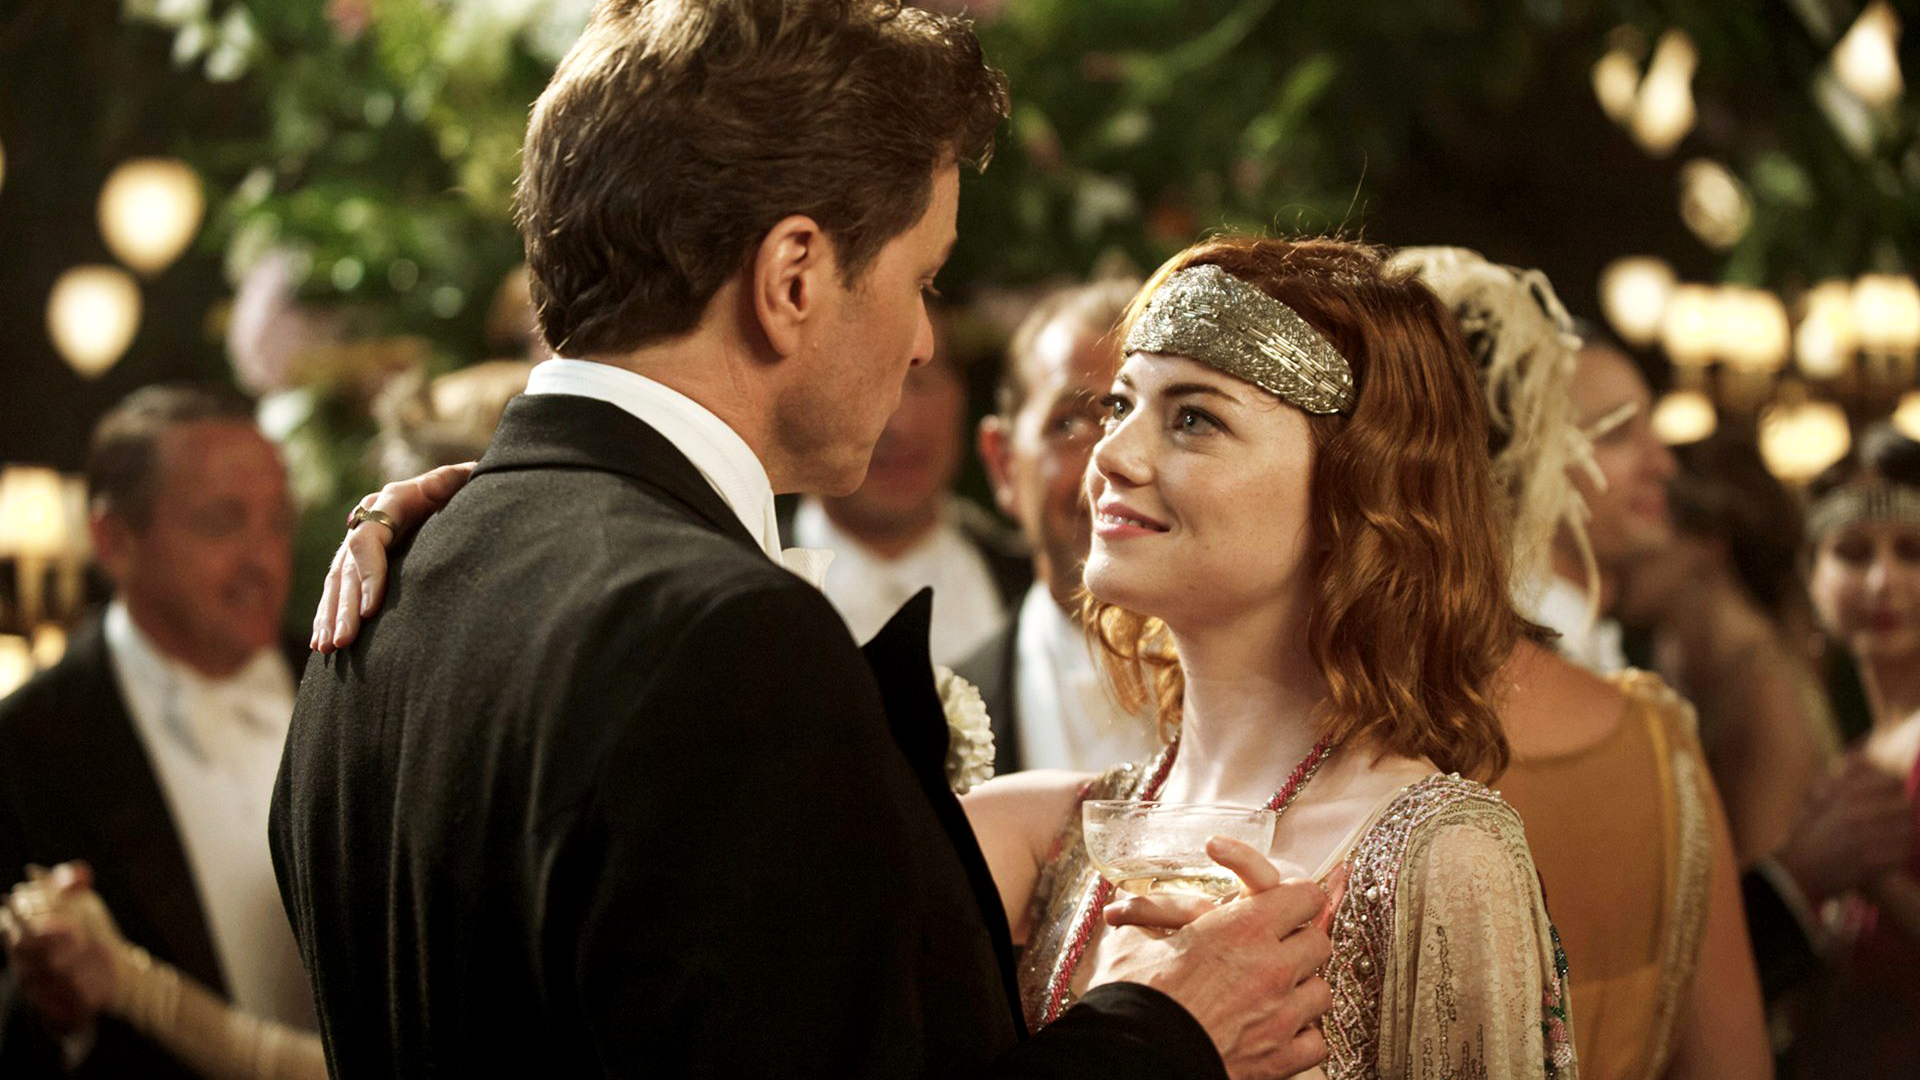 Wallpaper Colin Firth and Emma Stone in Magic in the moonlight movie